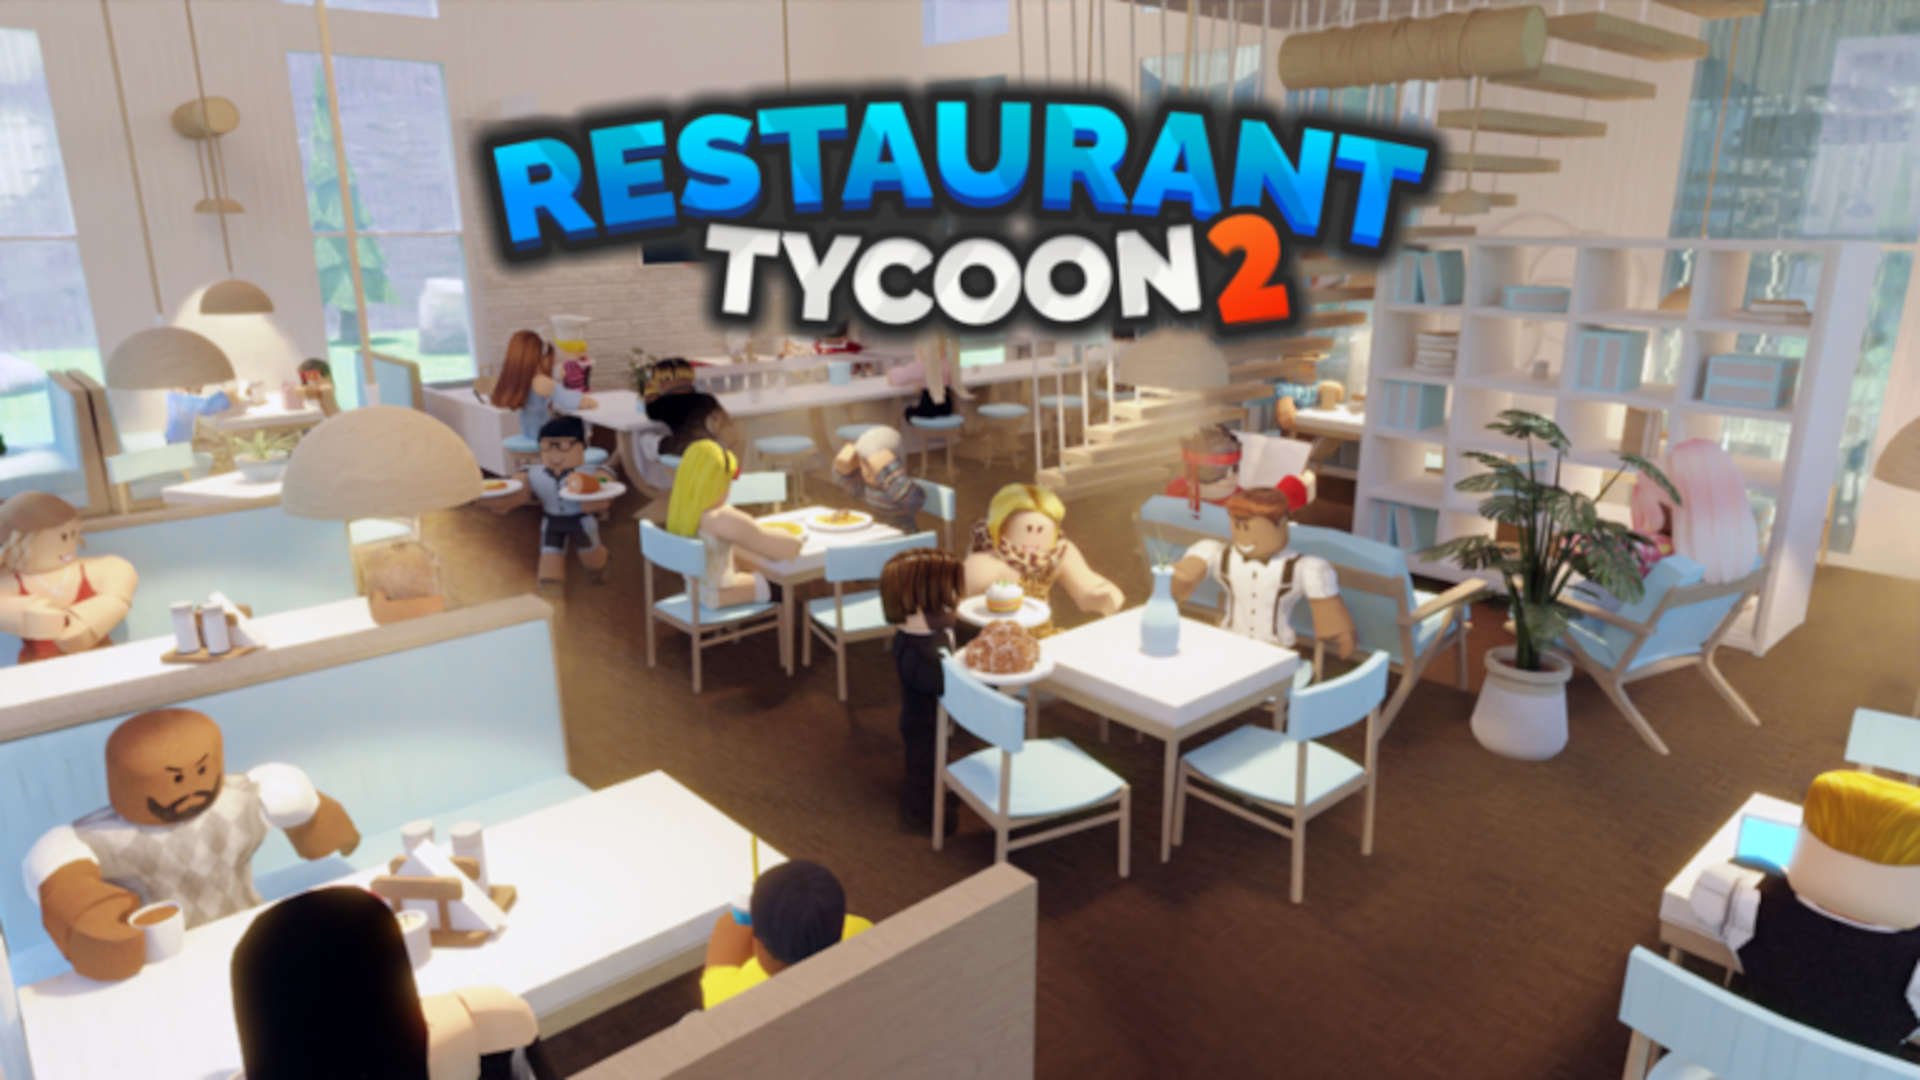 Restaurant Tycoon 2 Codes – Get Your Freebies!